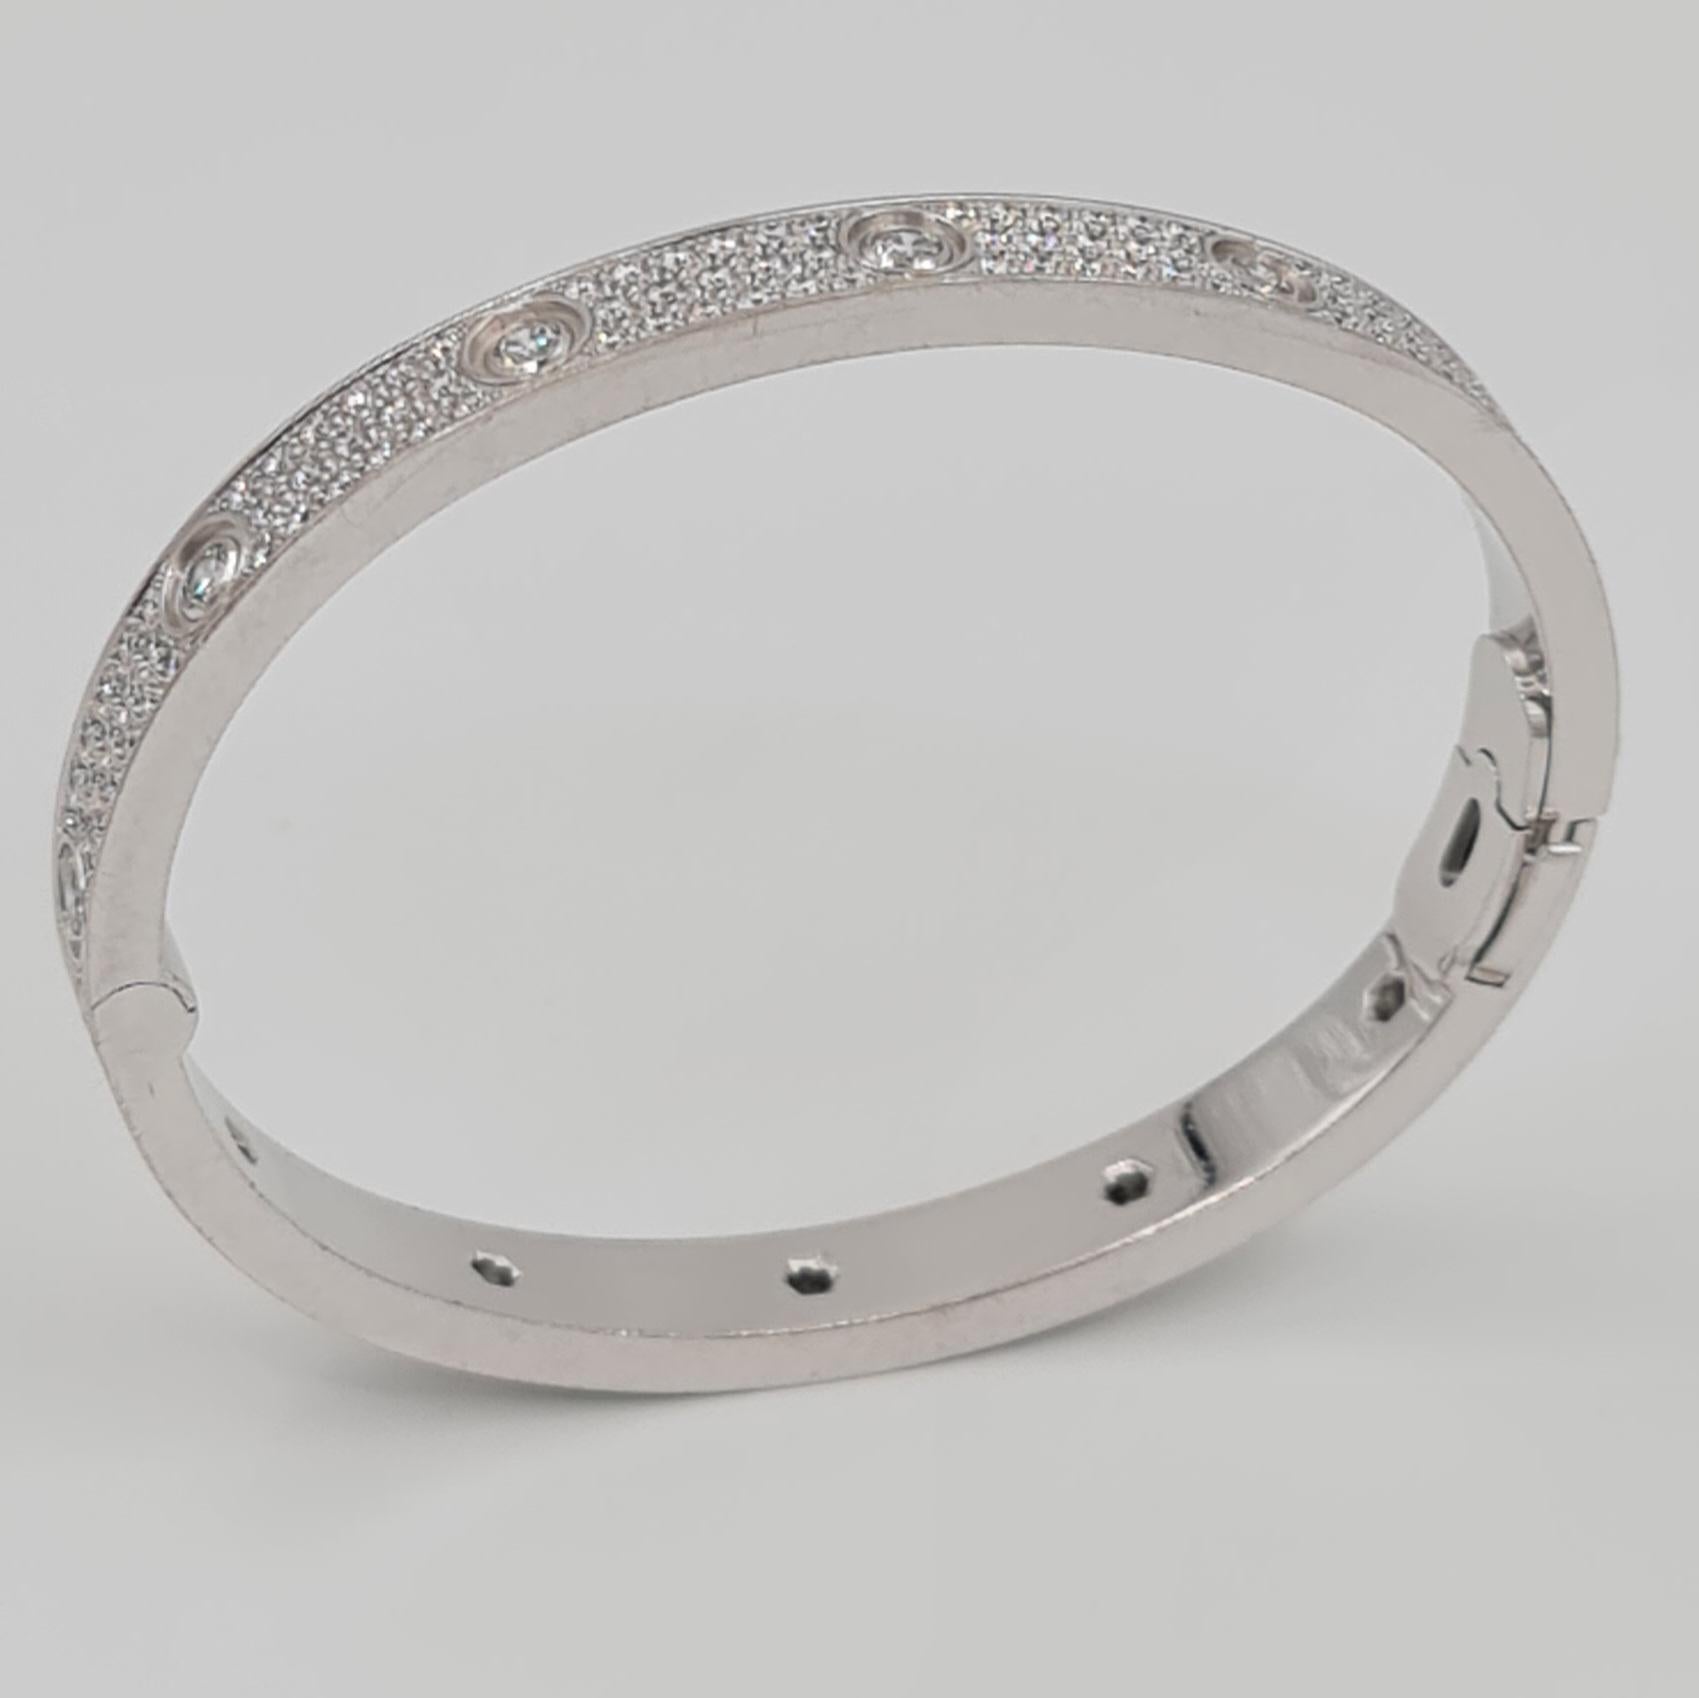 Authentic Cartier 'Love' bangle bracelet crafted in 18 carat white gold with diamond screw tops and pave set round brilliant cut diamonds (D-F in color, VVS clarity) for an estimated 3.70 carats total weight. Size 17. Signed Cartier, 17, 750, with